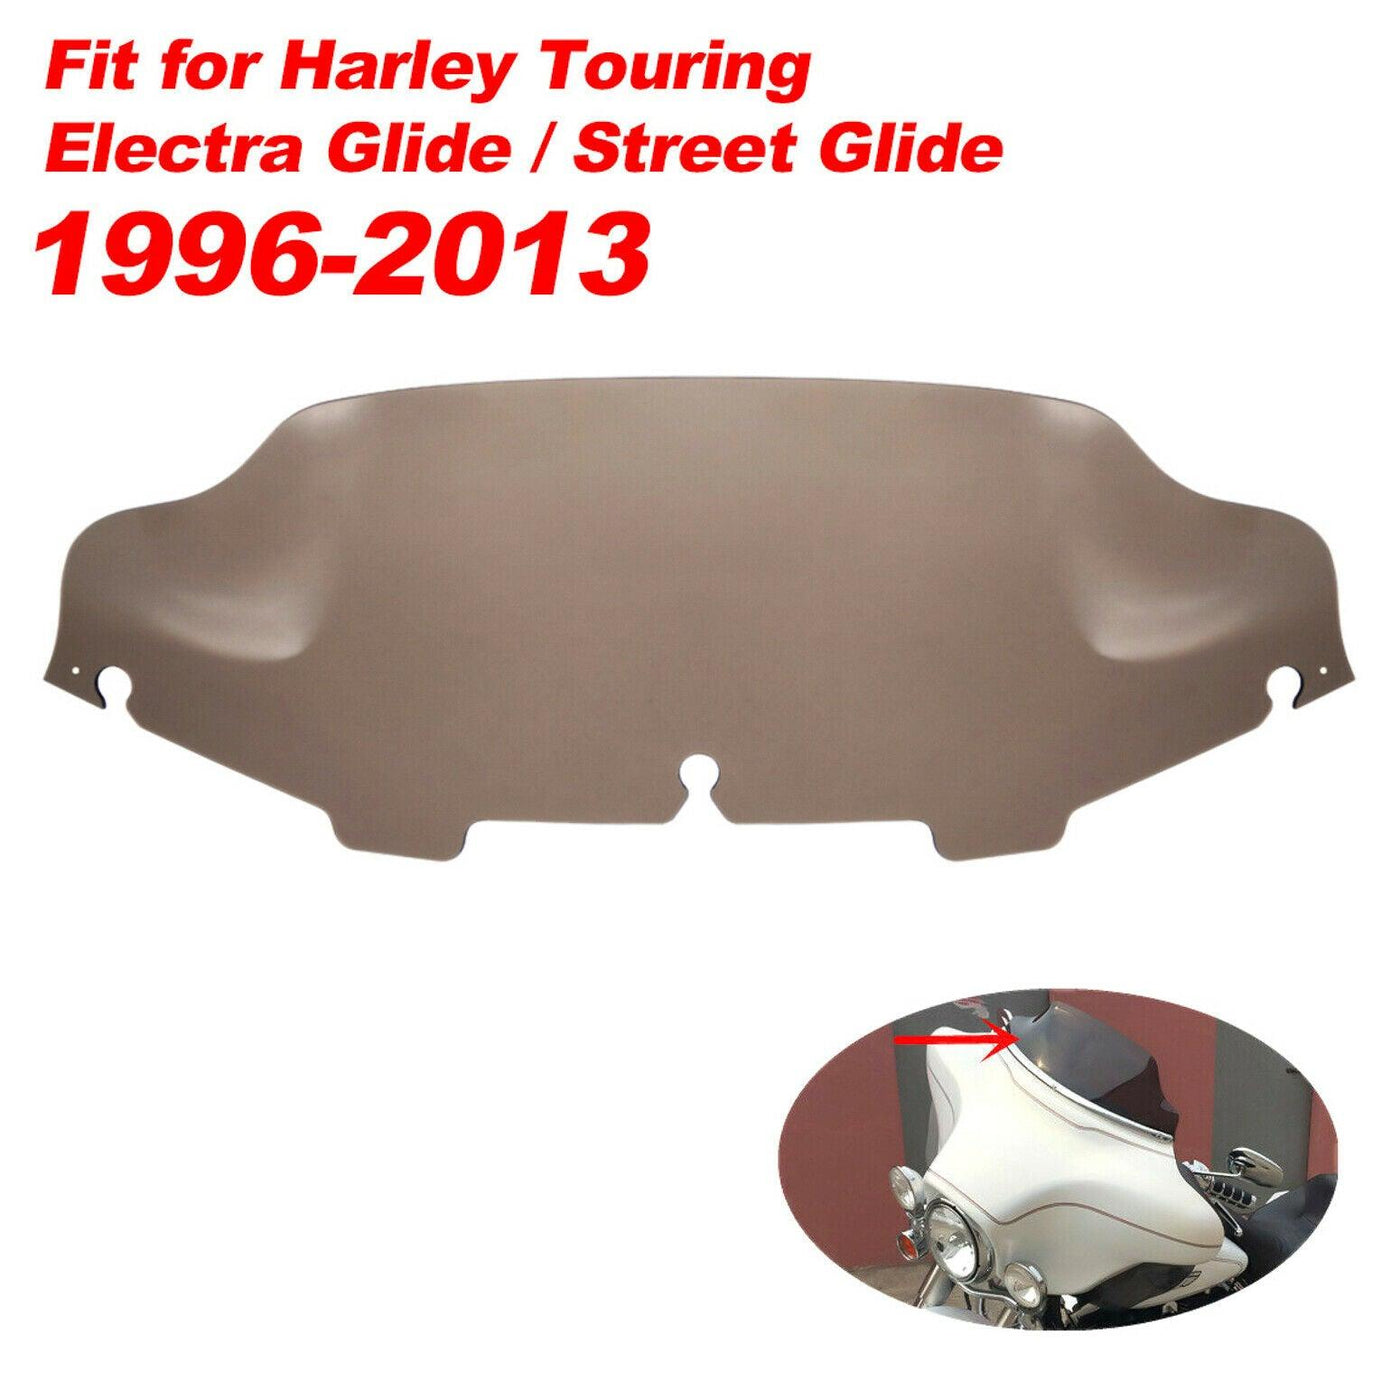 6" Smoke Wave Fairing Windshield Fit for Harley Electra Street Glide FLHT 96-13 - Moto Life Products